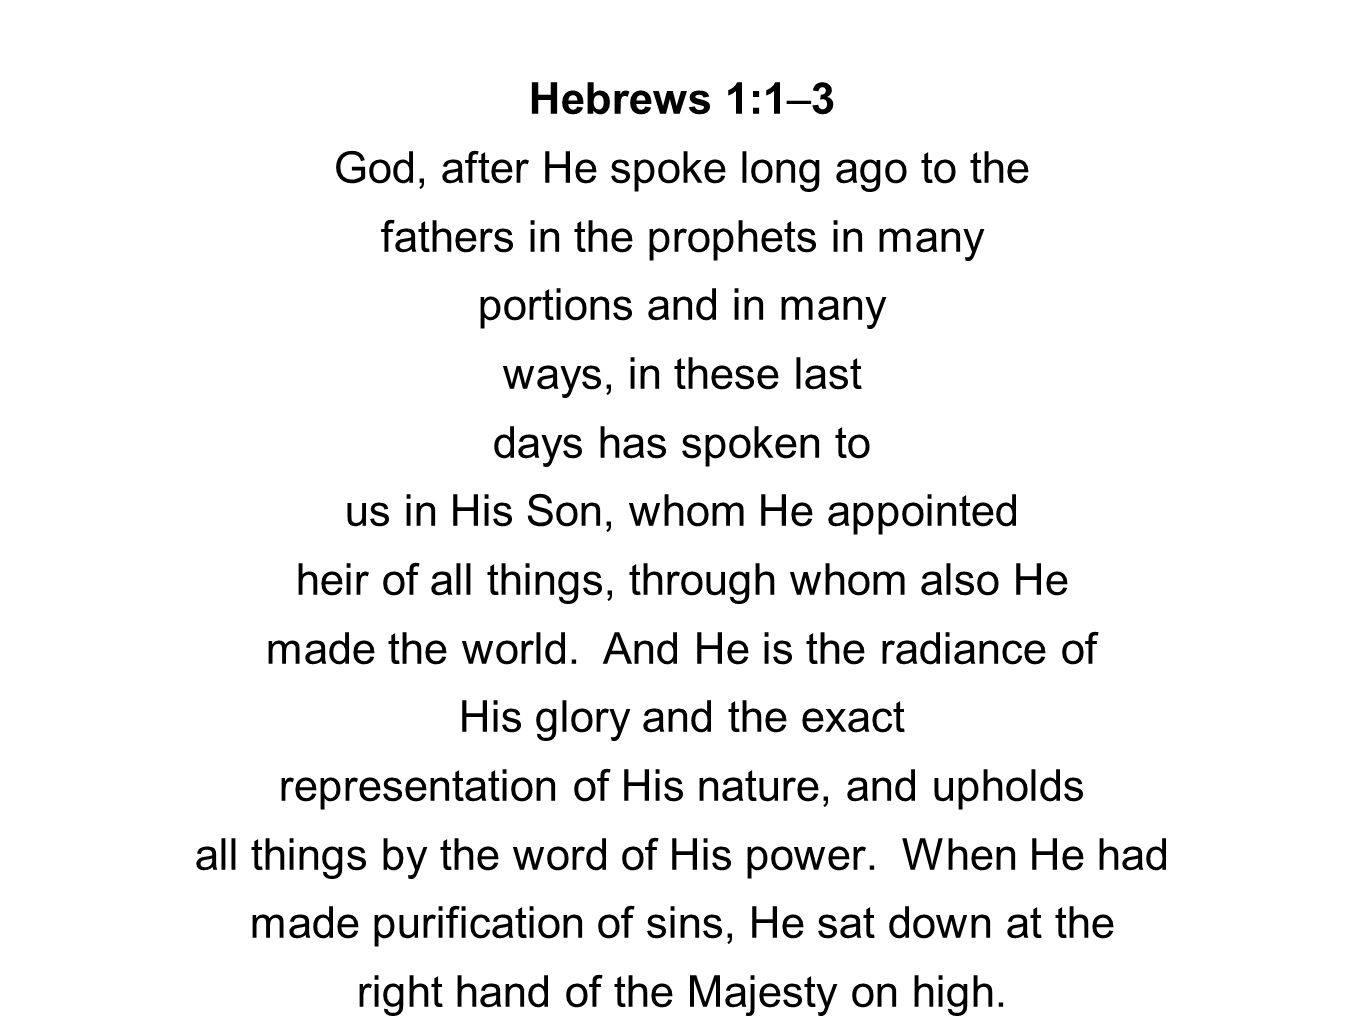 Hebrews 1:1–3 God, after He spoke long ago to the fathers in the prophets in many portions and in many ways, in these last days has spoken to us in His Son, whom He appointed heir of all things, through whom also He made the world.